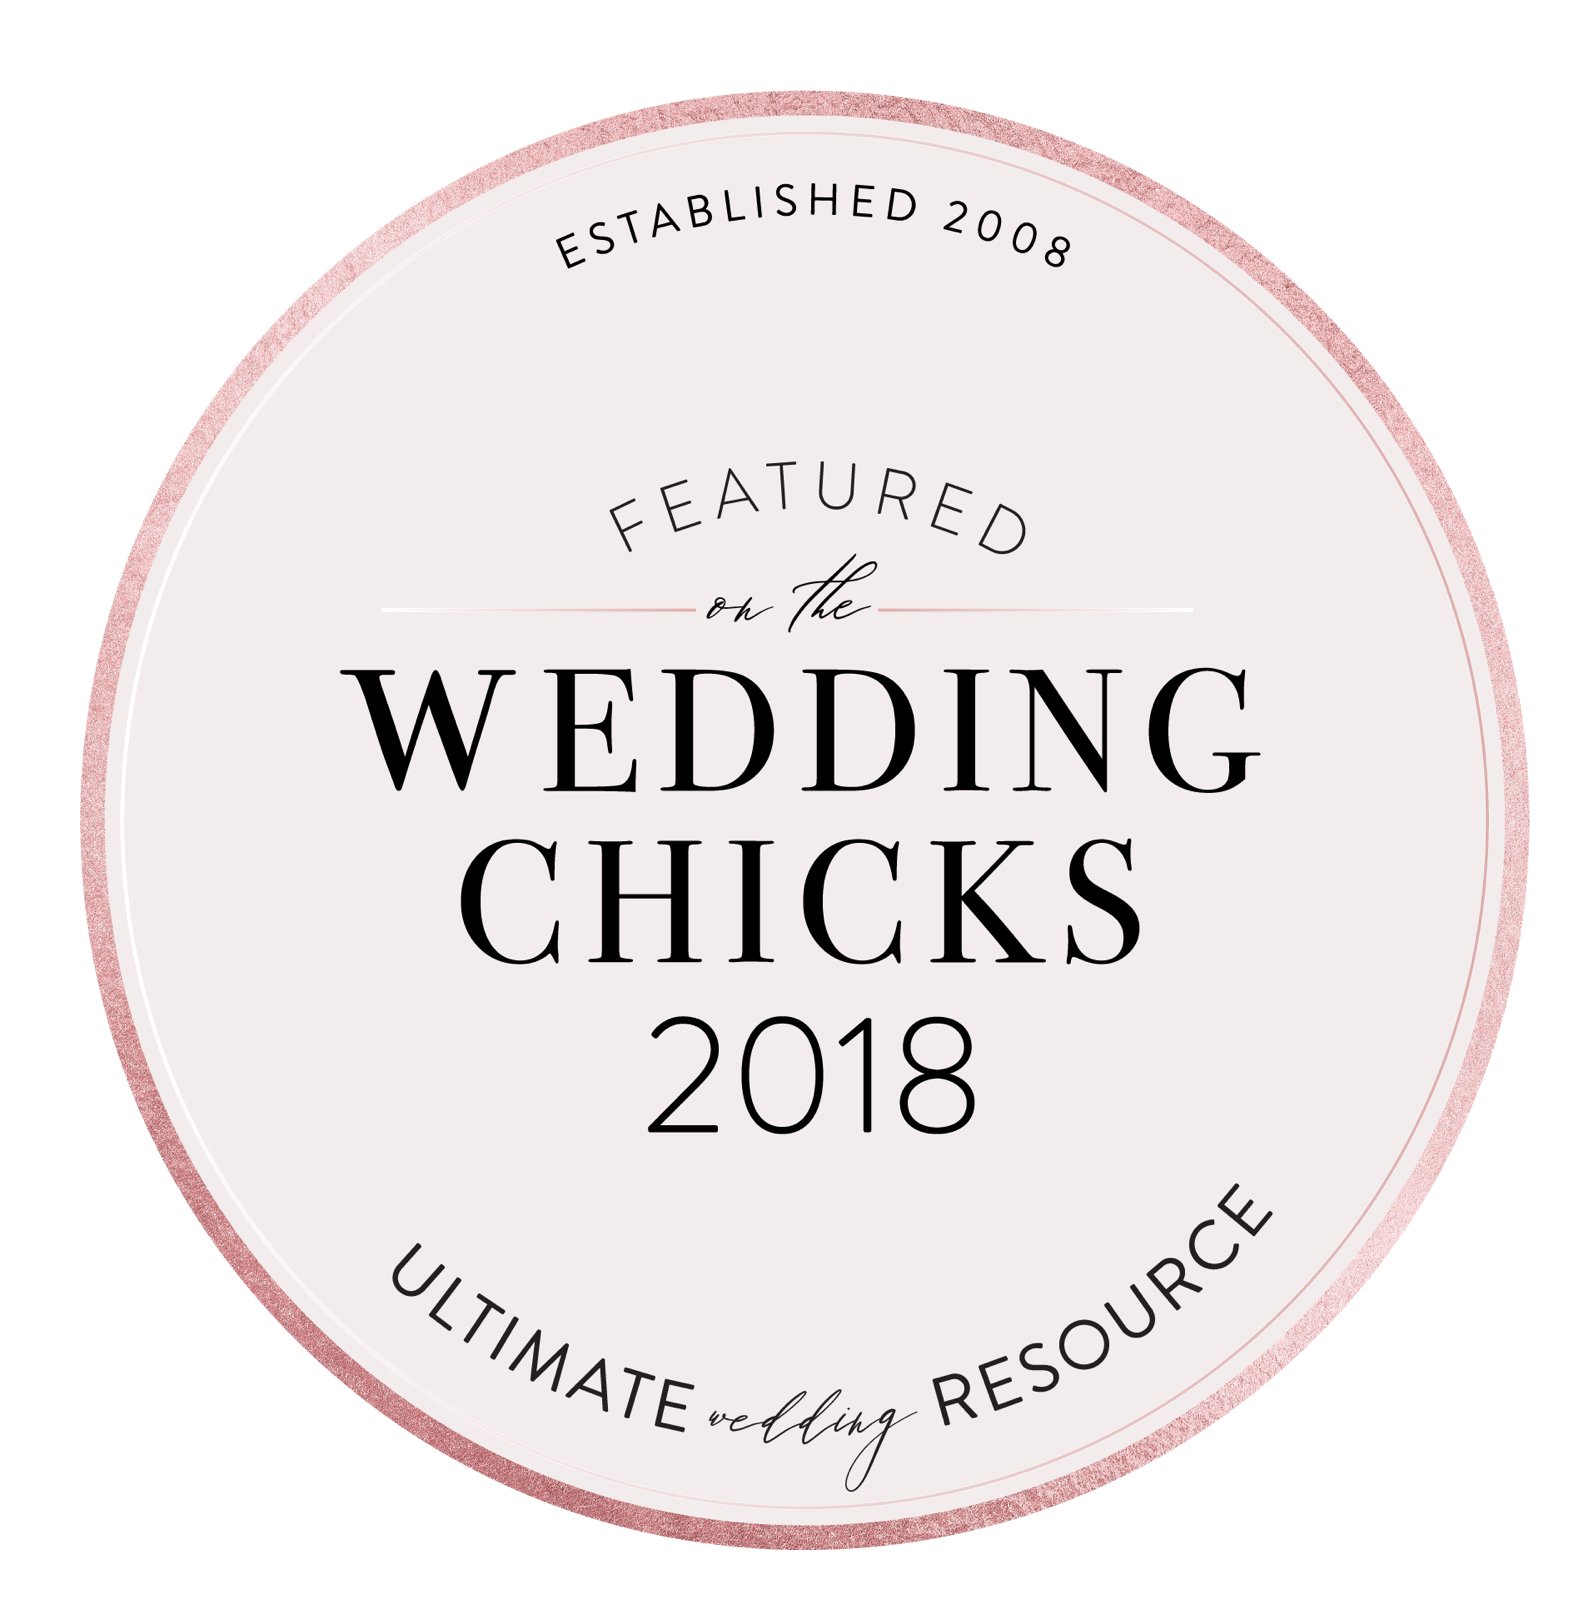 The Wedding Chicks Feature Badge Publication